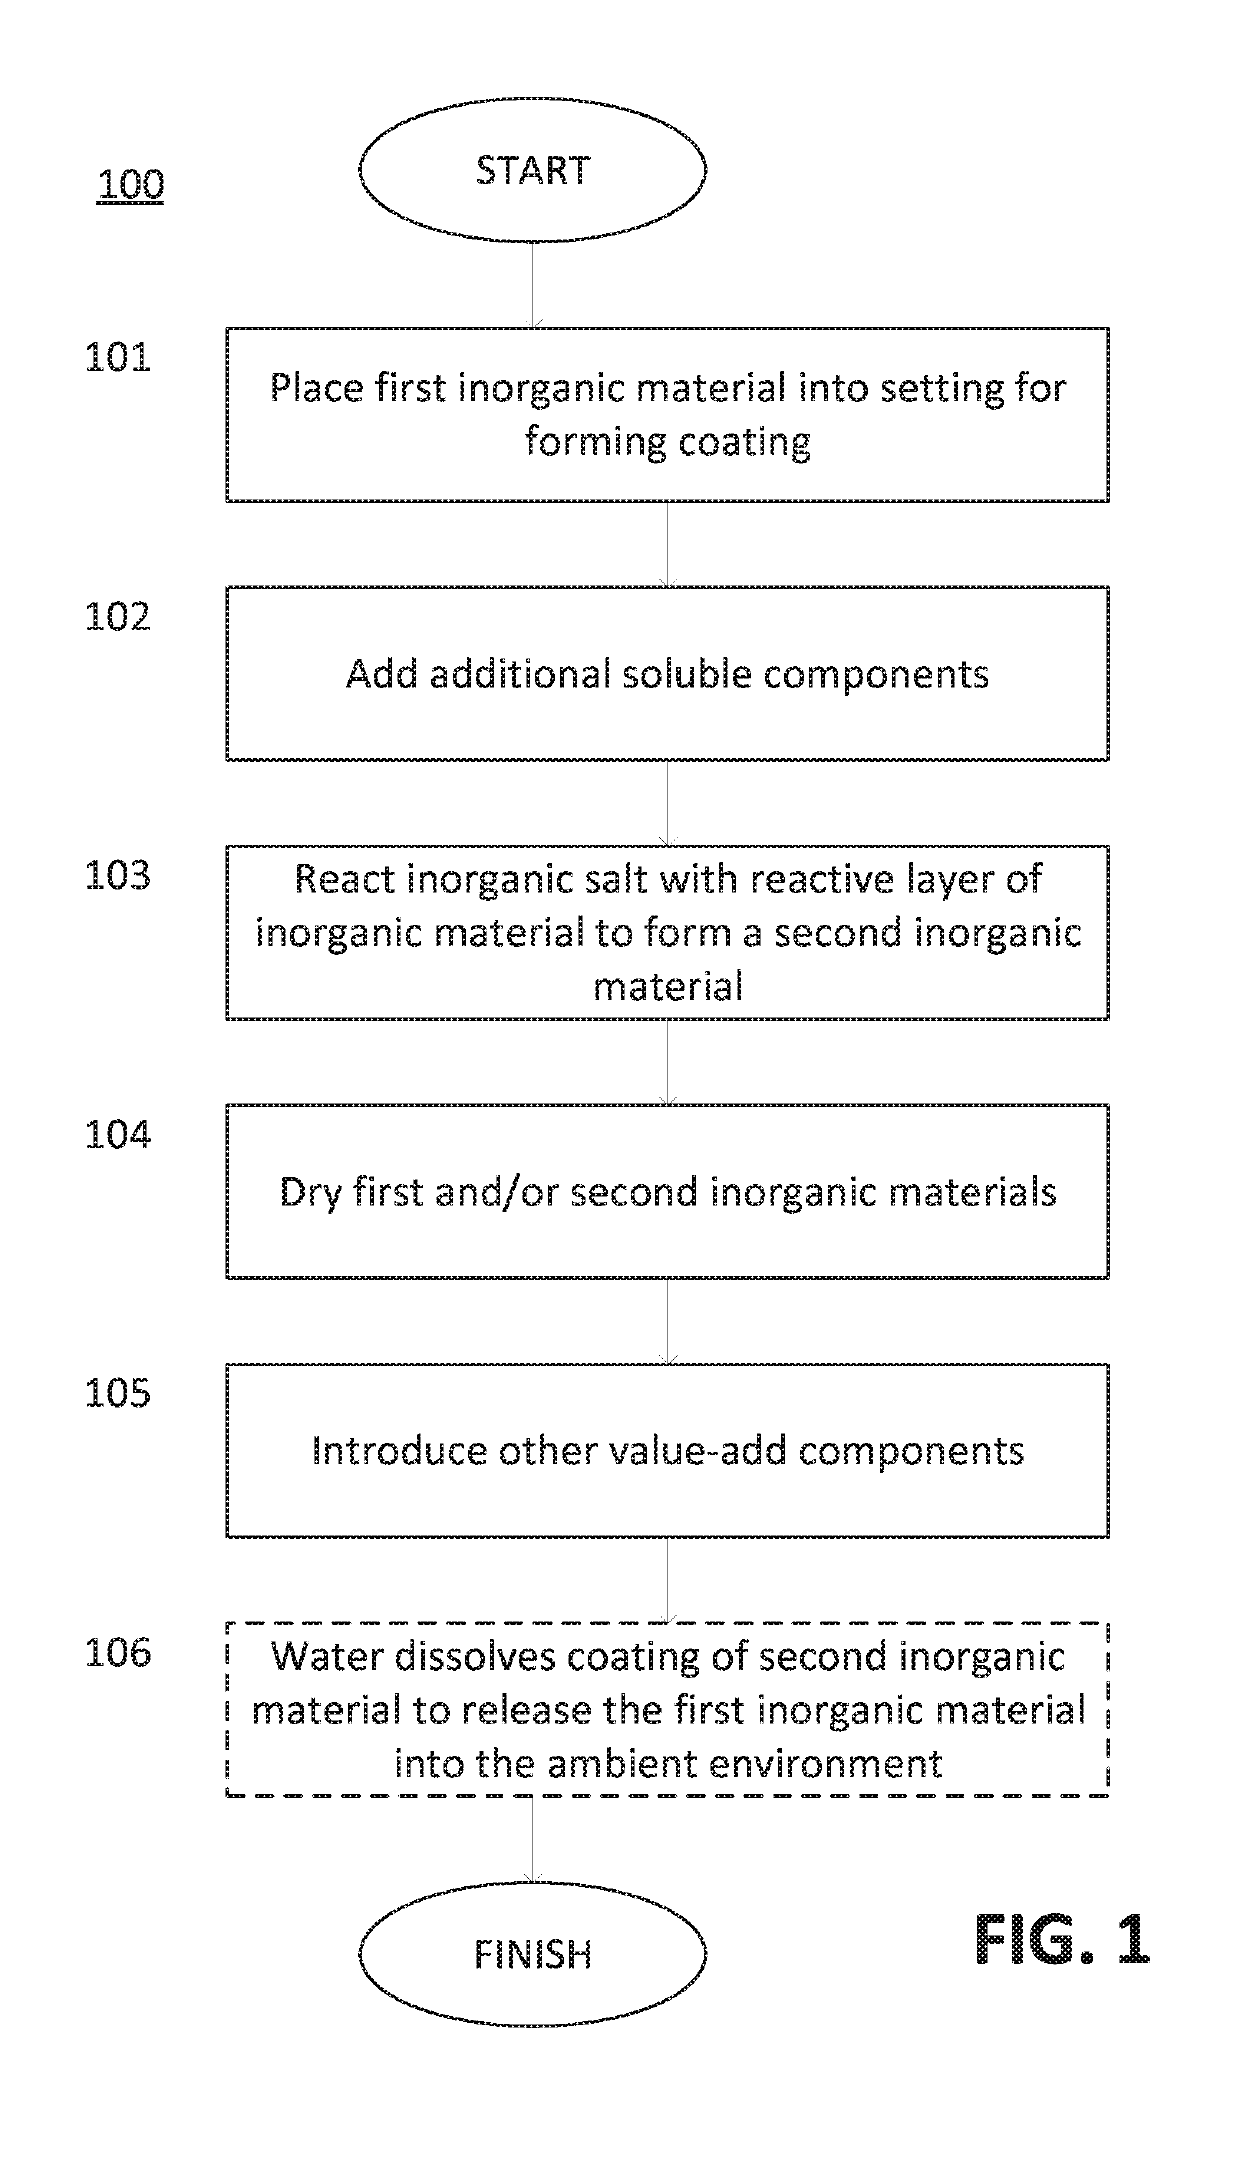 Coated inorganic materials and methods for forming the coated inorganic materials